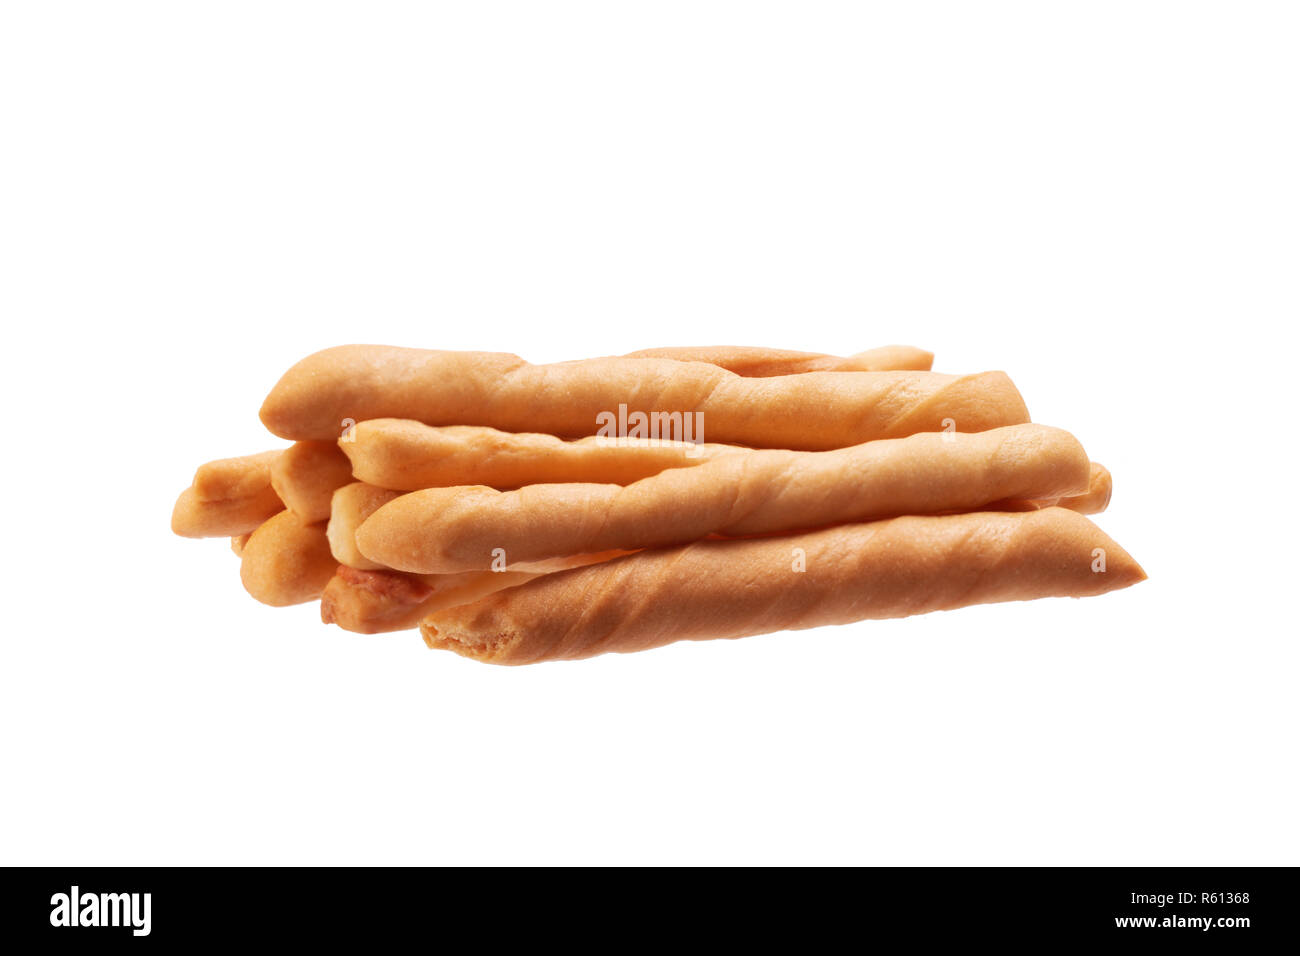 Cheese breadsticks isolated on white background. Stock Photo